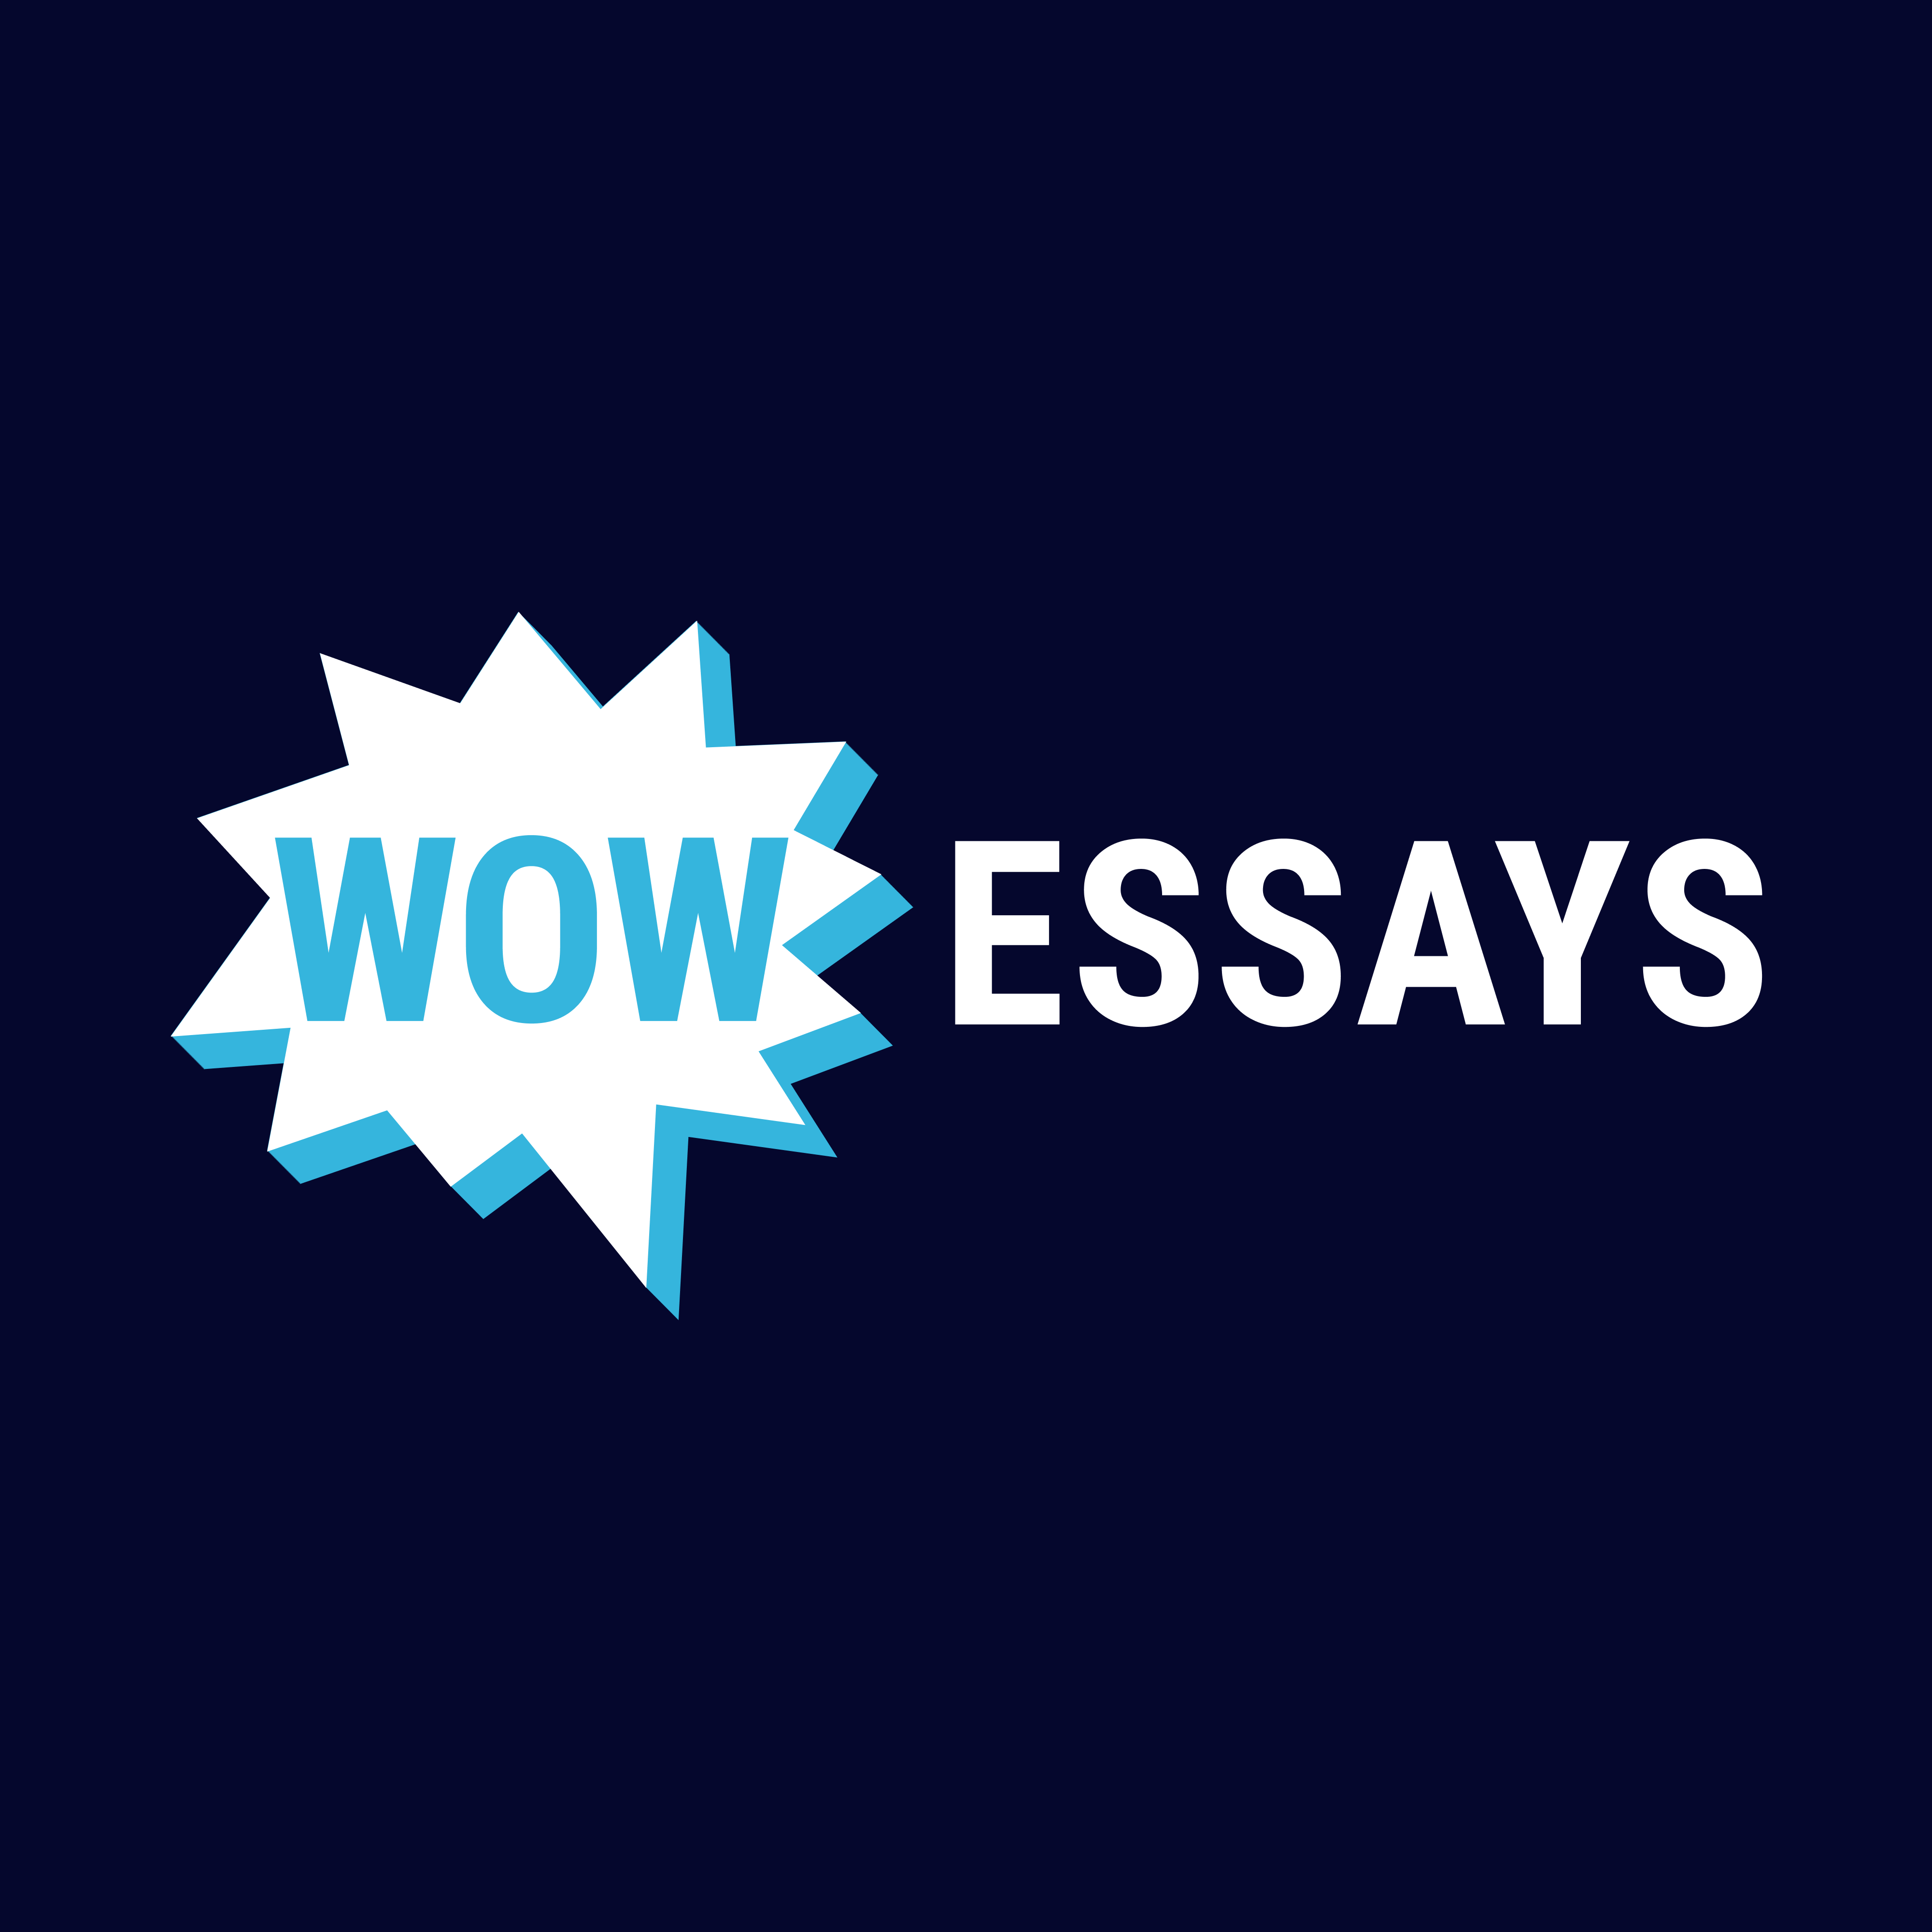 Where Will essay writer Be 6 Months From Now?